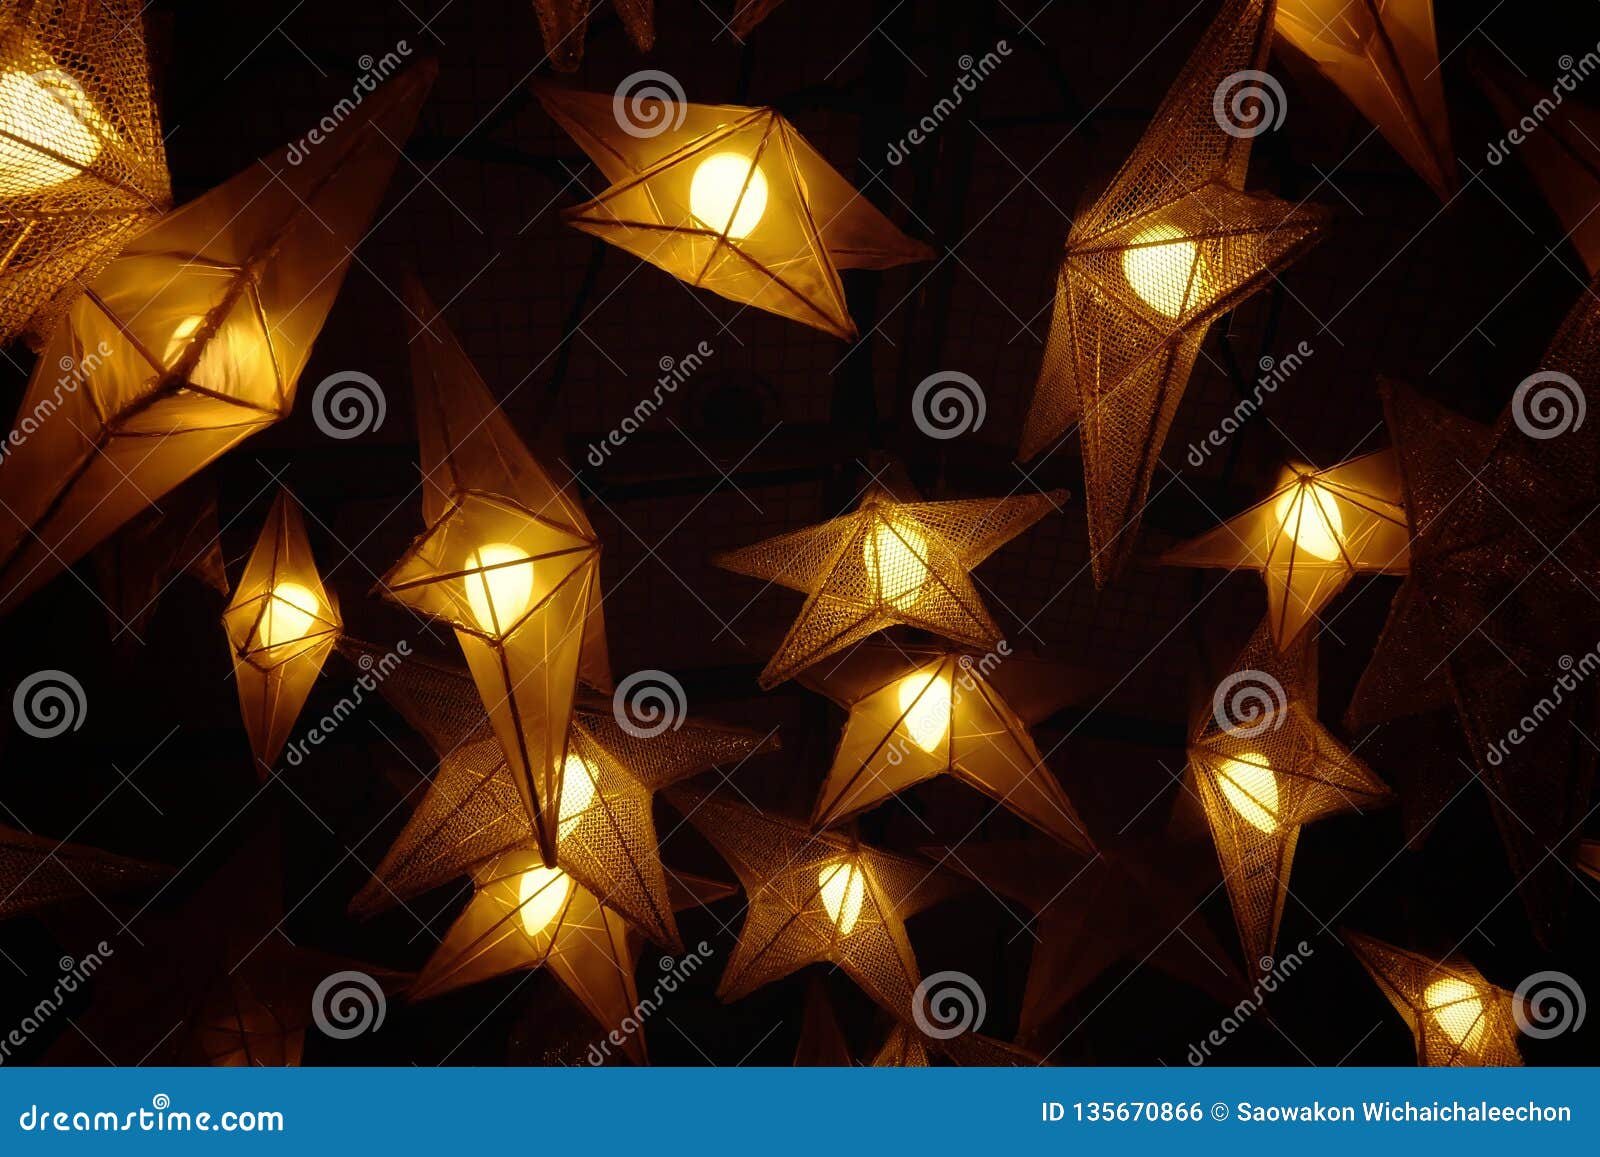 Many Star Lamps Hanging From The Ceiling And Glowing In The Dark